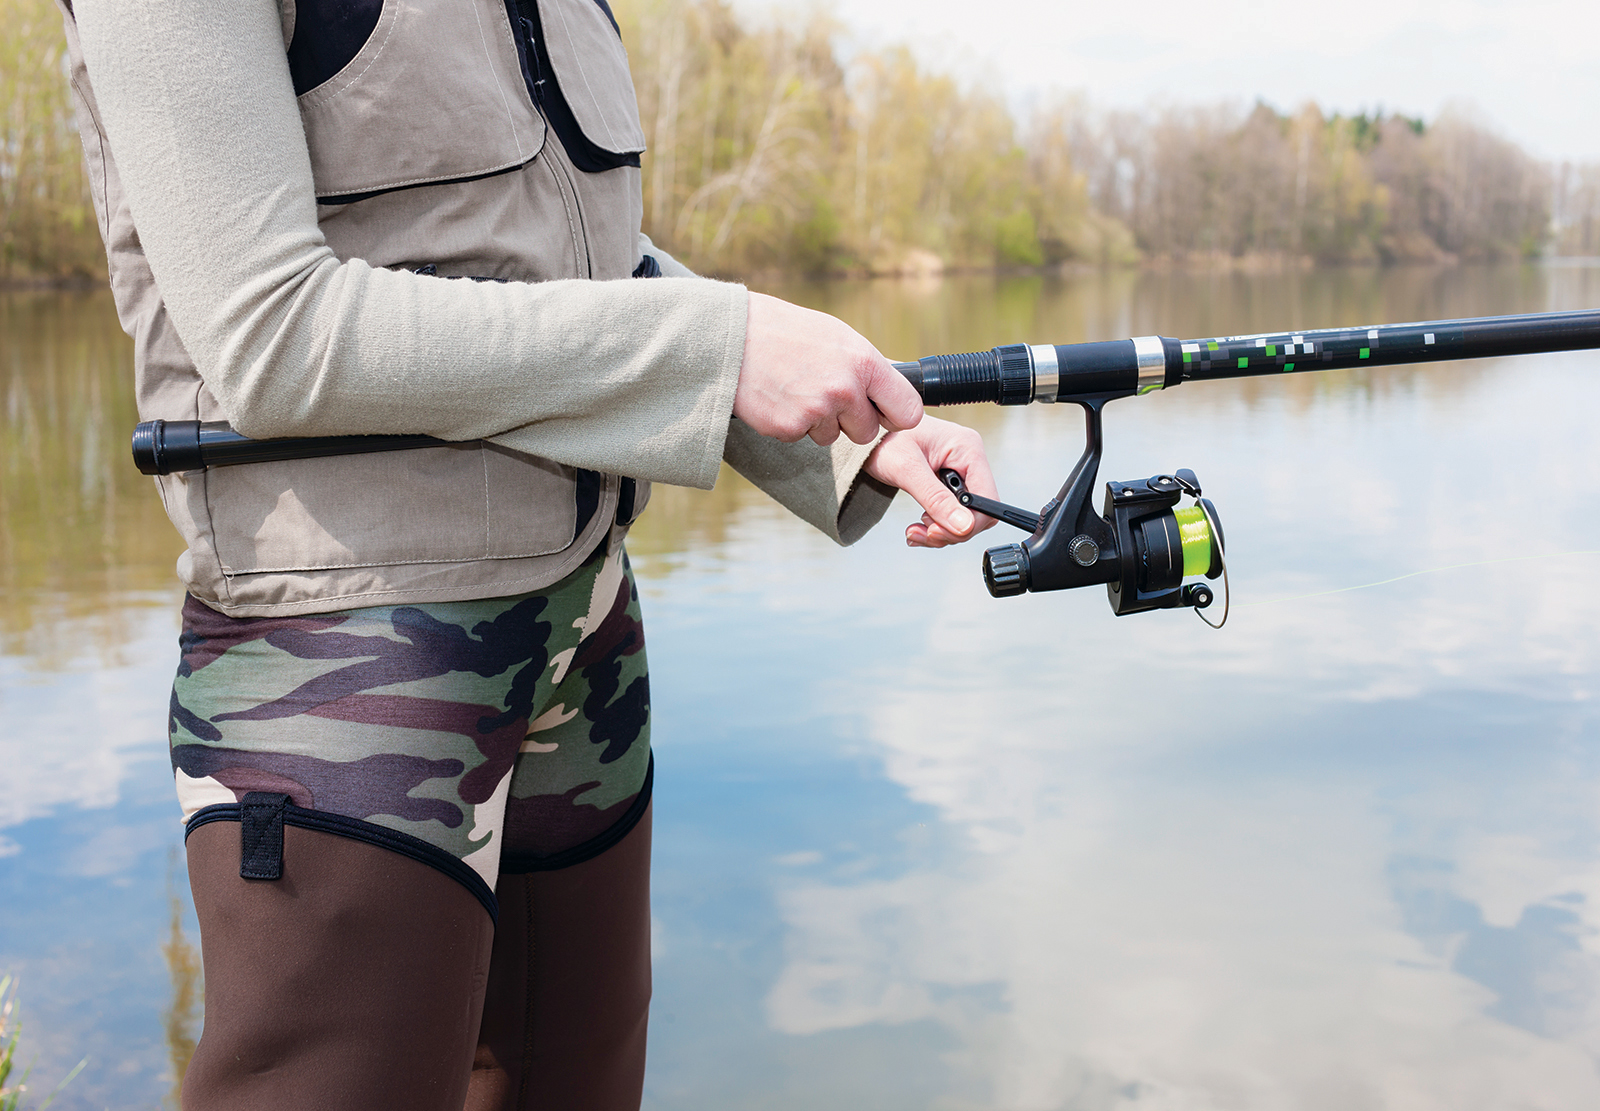 Fishing rod buying guide: key factors to consider 